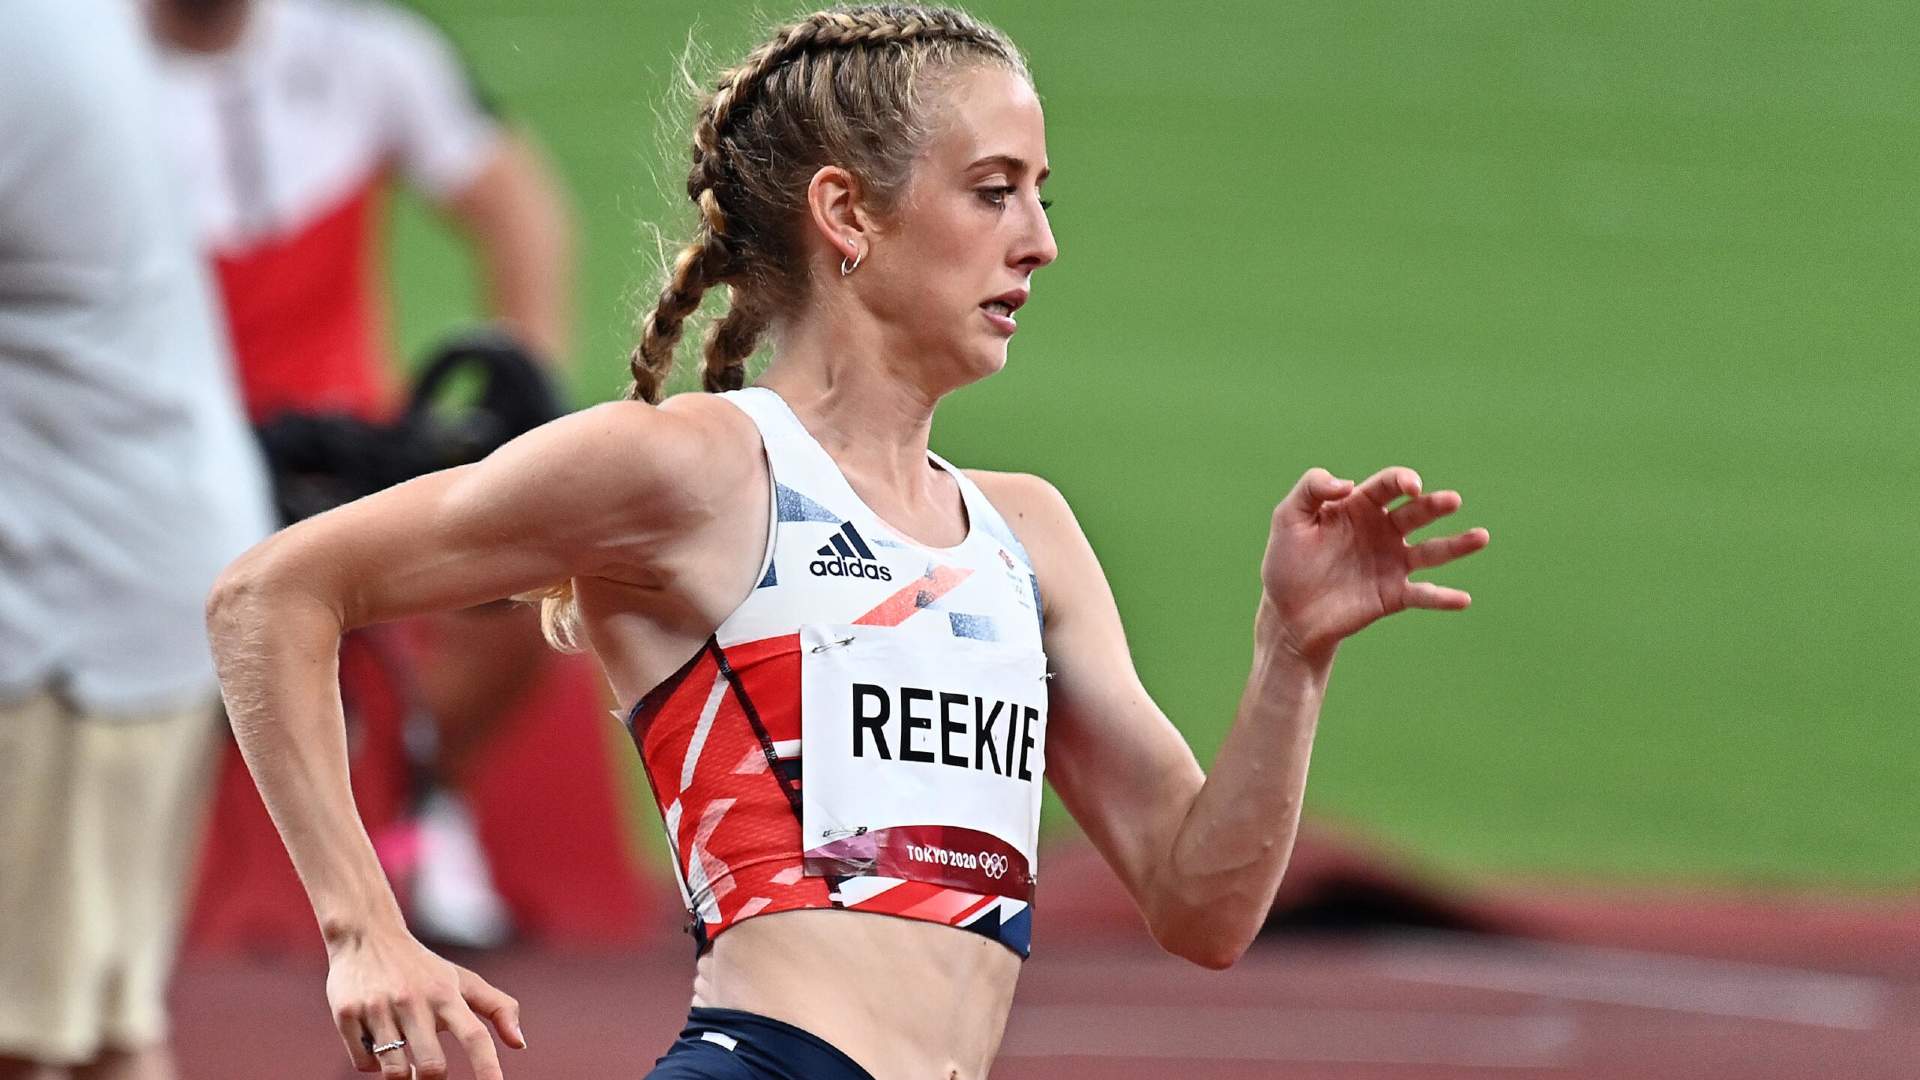 Jemma Reekie in action during Tokyo Olympics 2020 (Image Credits - Scottish Athletics)